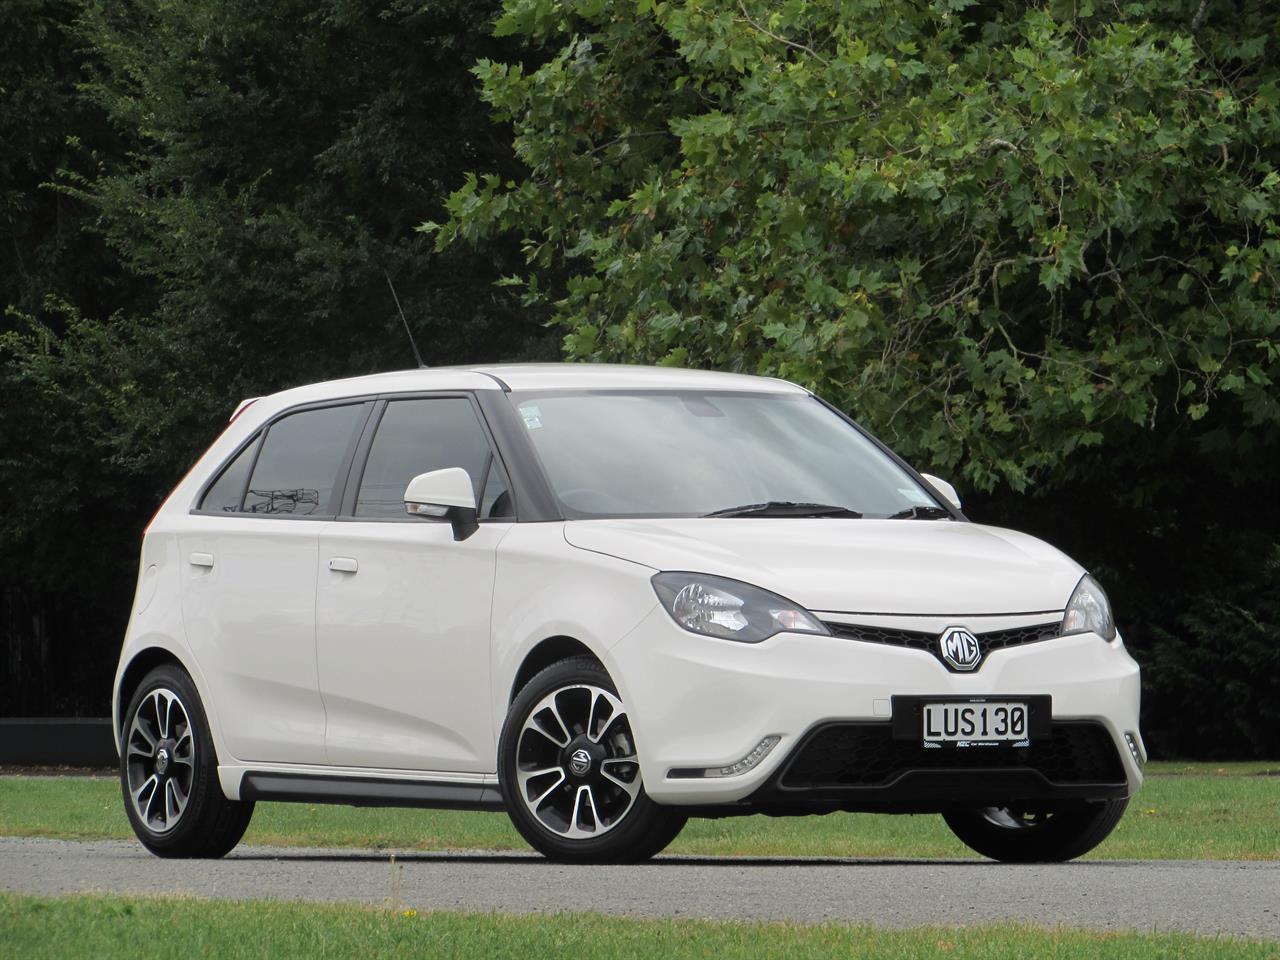 NZC best hot price for 2018 MG 3 in Christchurch